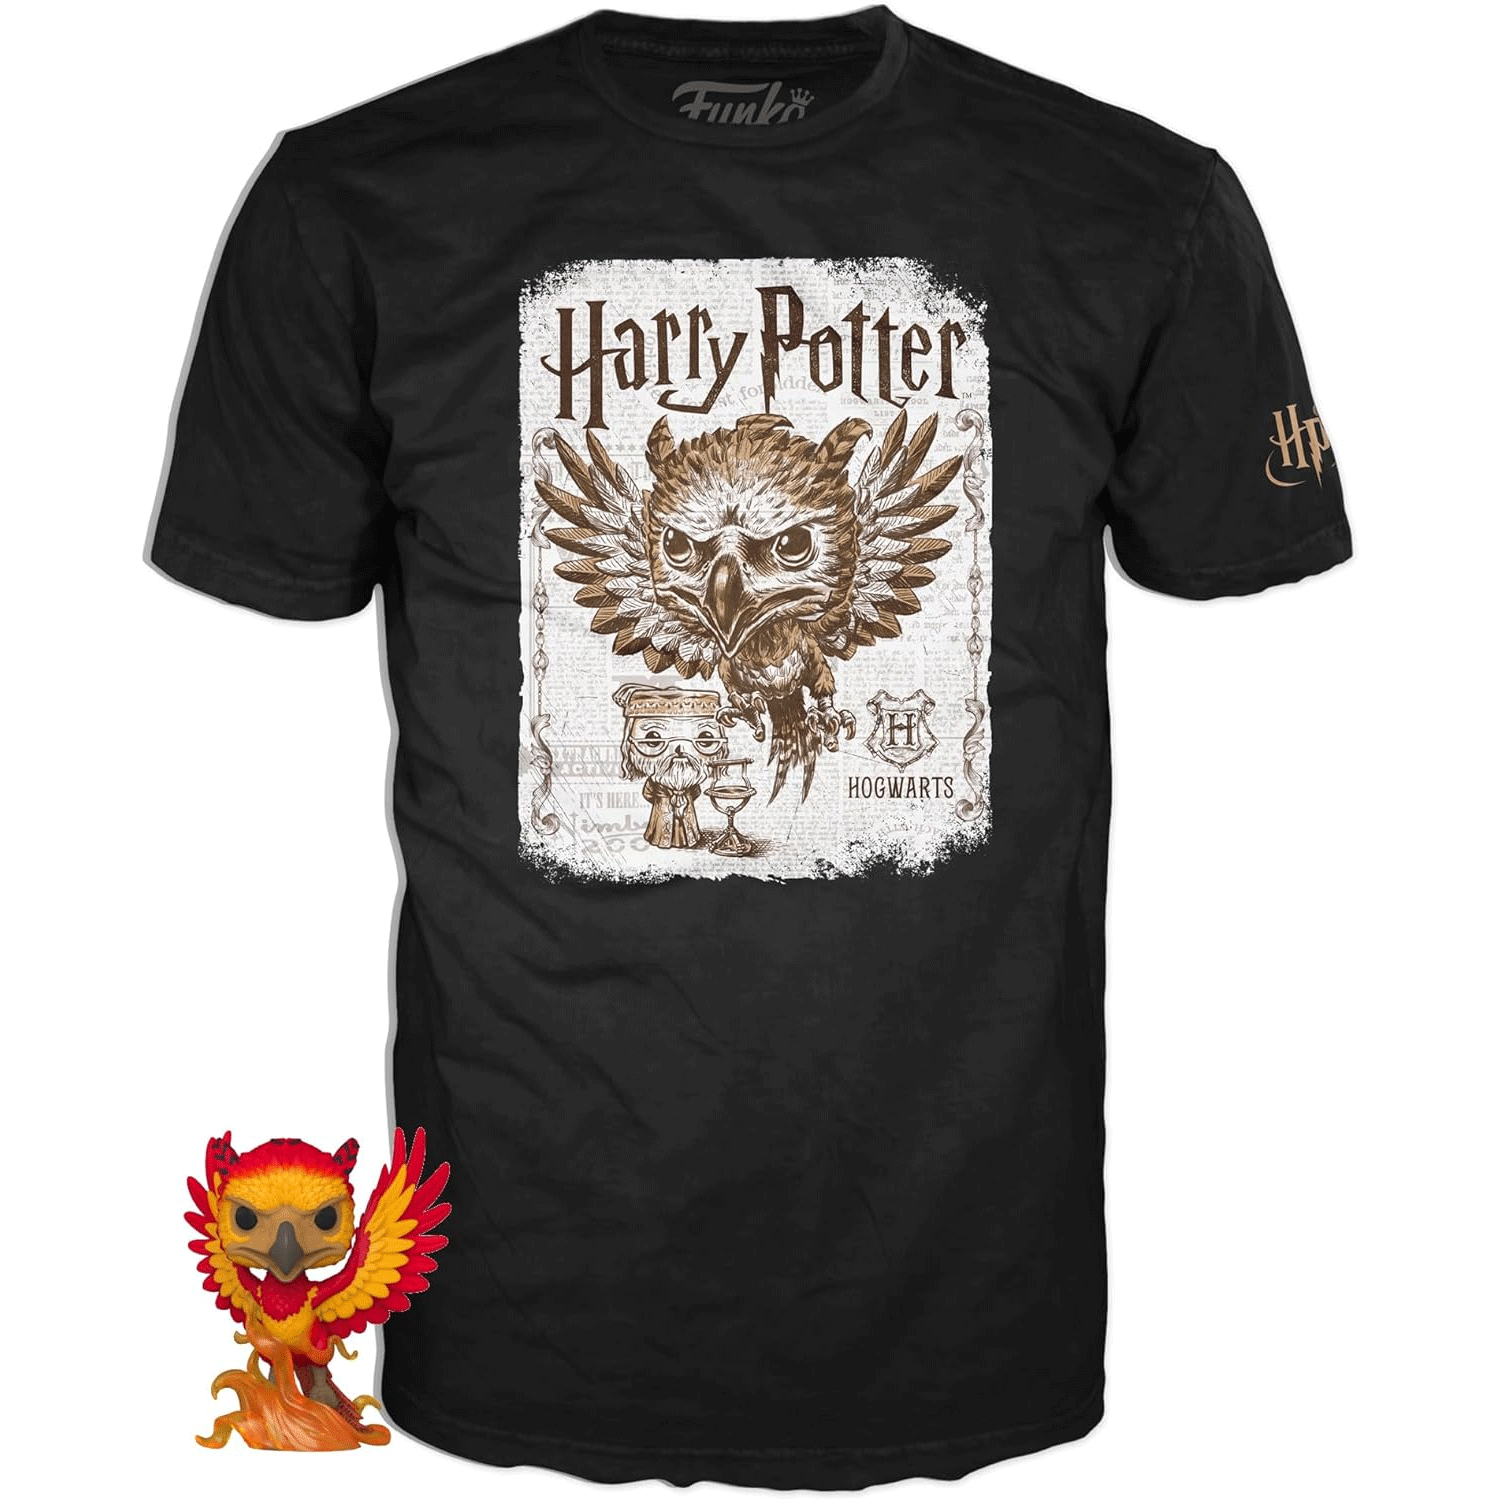 Harry Potter Fawkes the Phoenix Pop! Vinyl and Tee Set - GeekCore